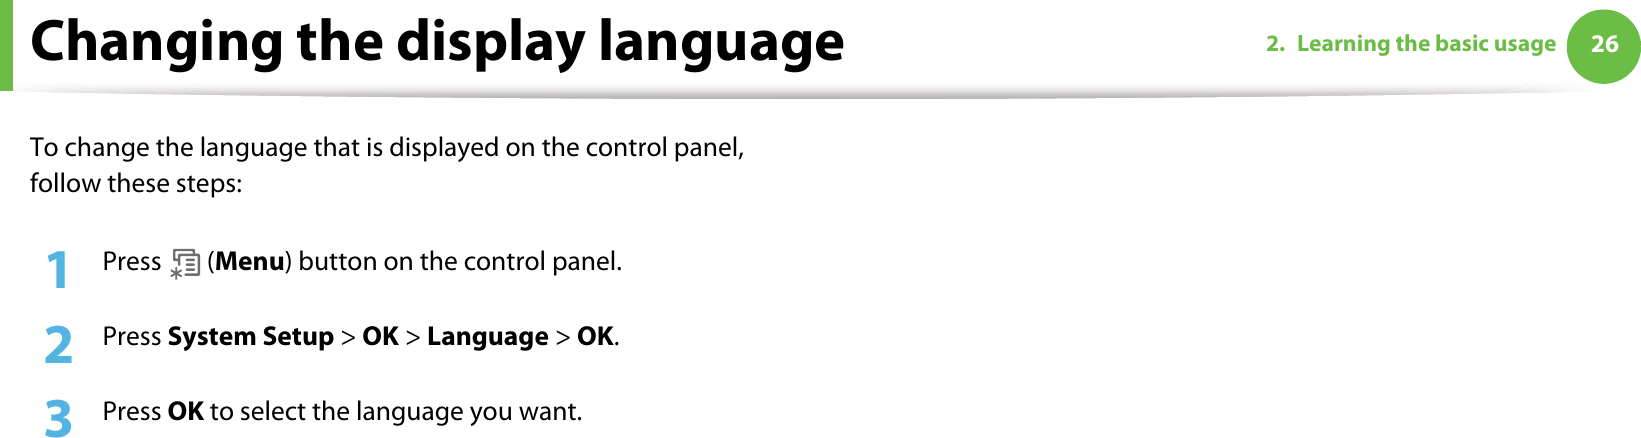 262. Learning the basic usageChanging the display languageTo change the language that is displayed on the control panel, follow these steps:1Press  (Menu) button on the control panel.2  Press System Setup &gt; OK &gt; Language &gt; OK.3  Press OK to select the language you want.